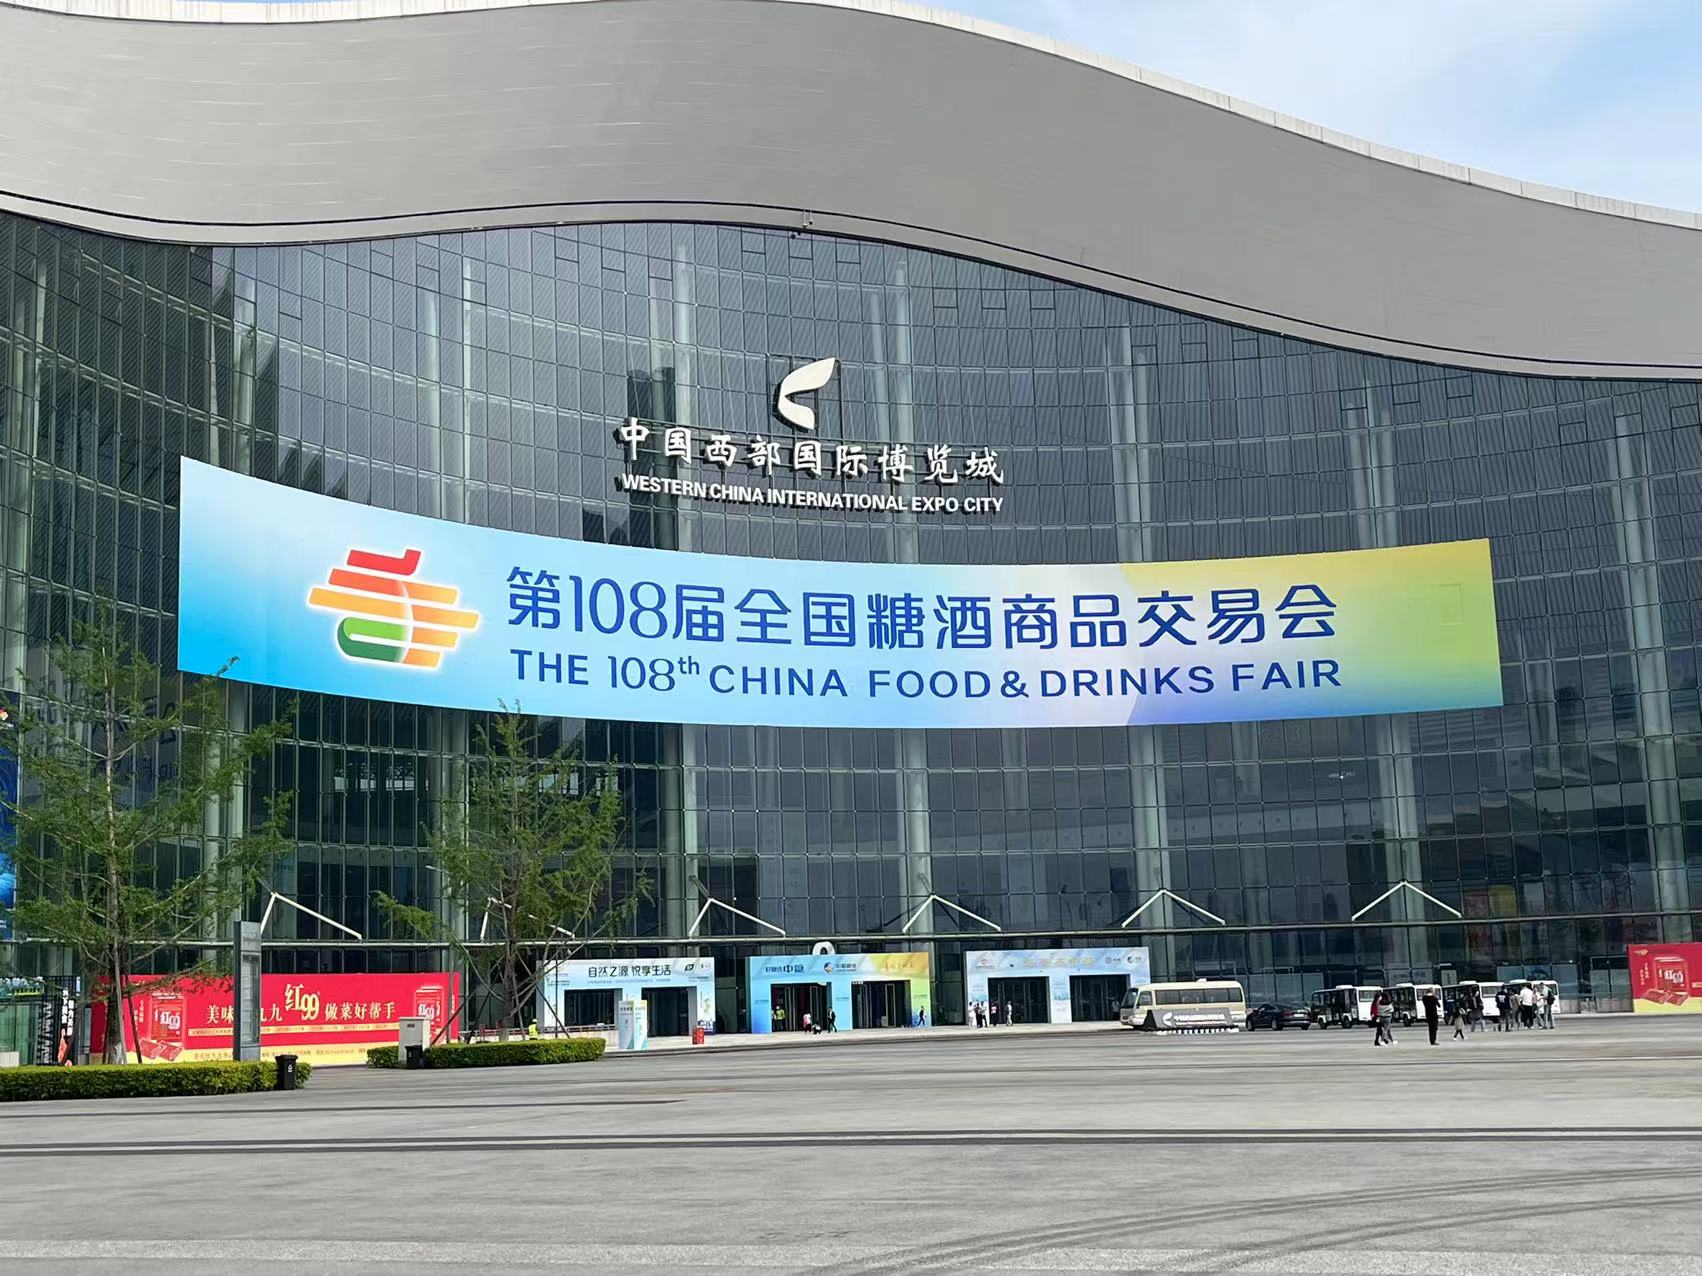 The 108th China Food & Drink Fair